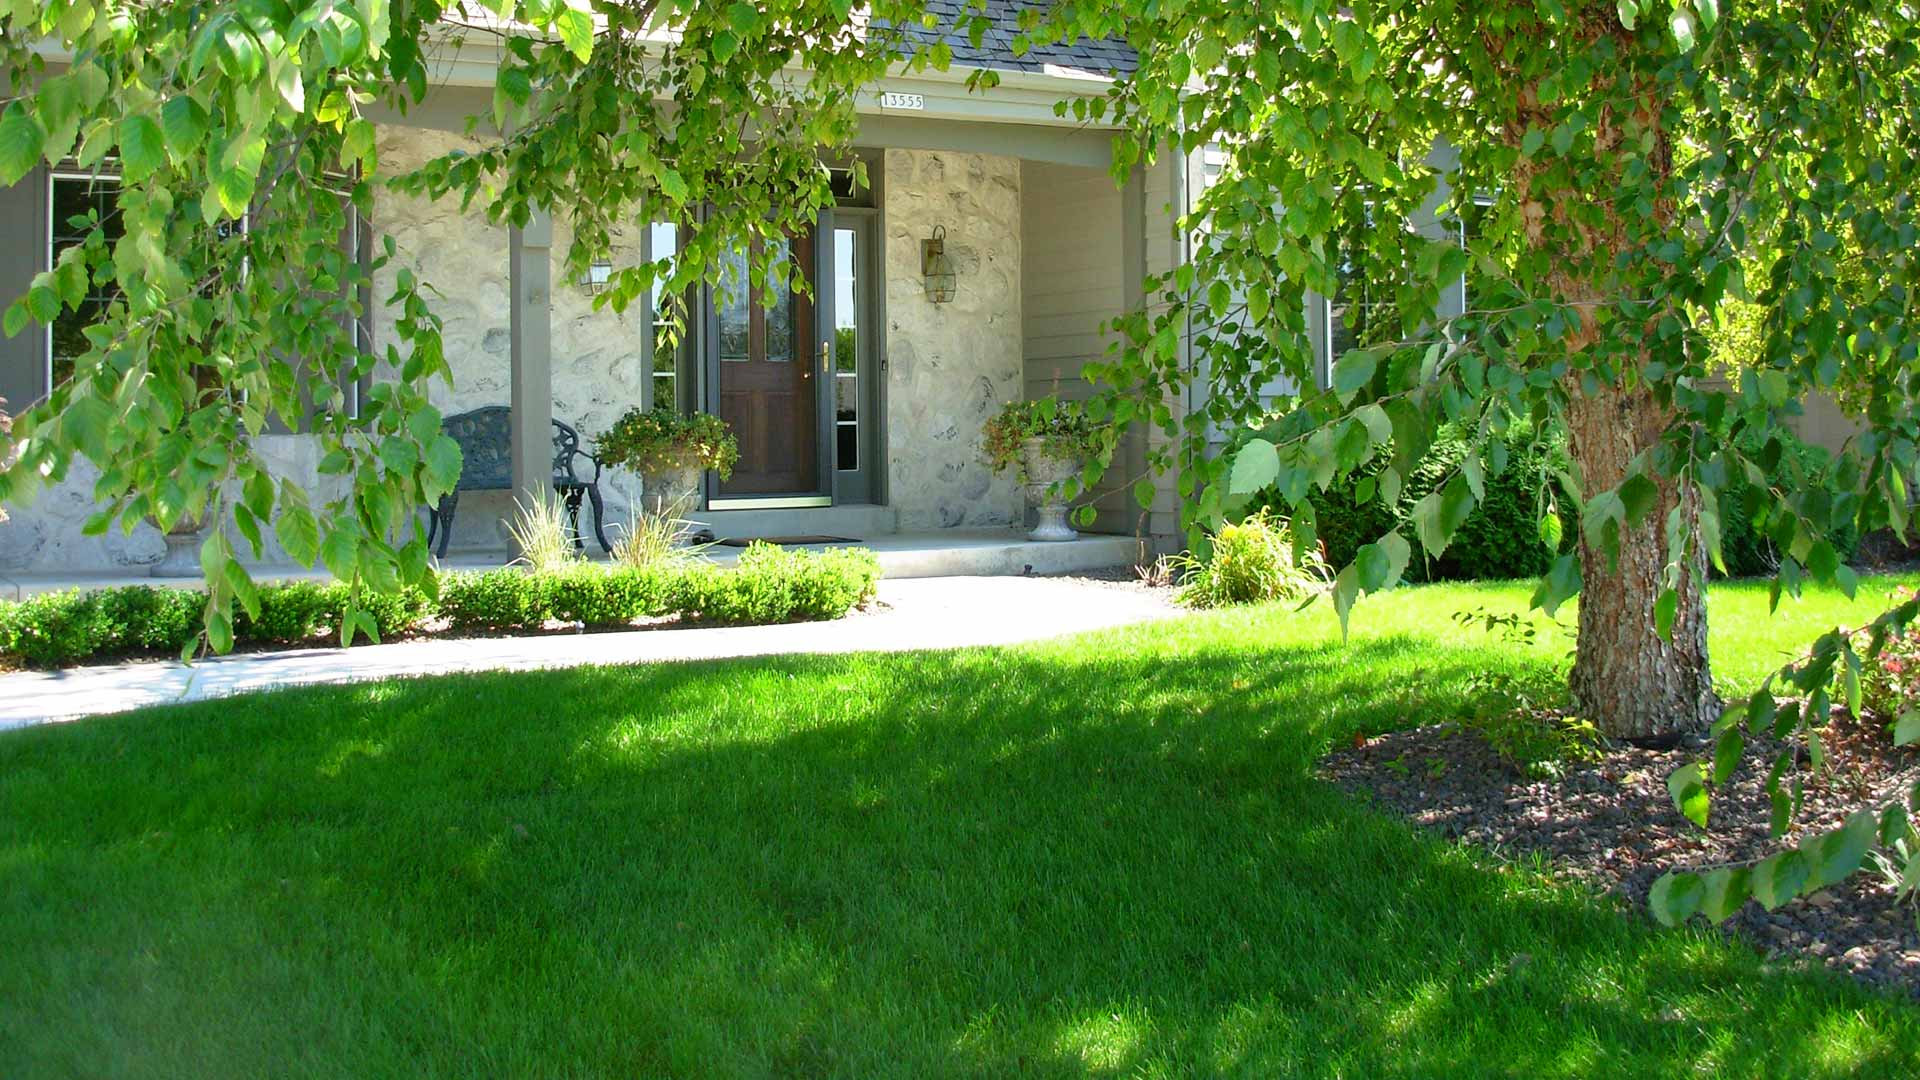 This image shows a well-manicured front yard with a green lawn, trees, a walkway leading to a home's entrance, and stone exterior walls.